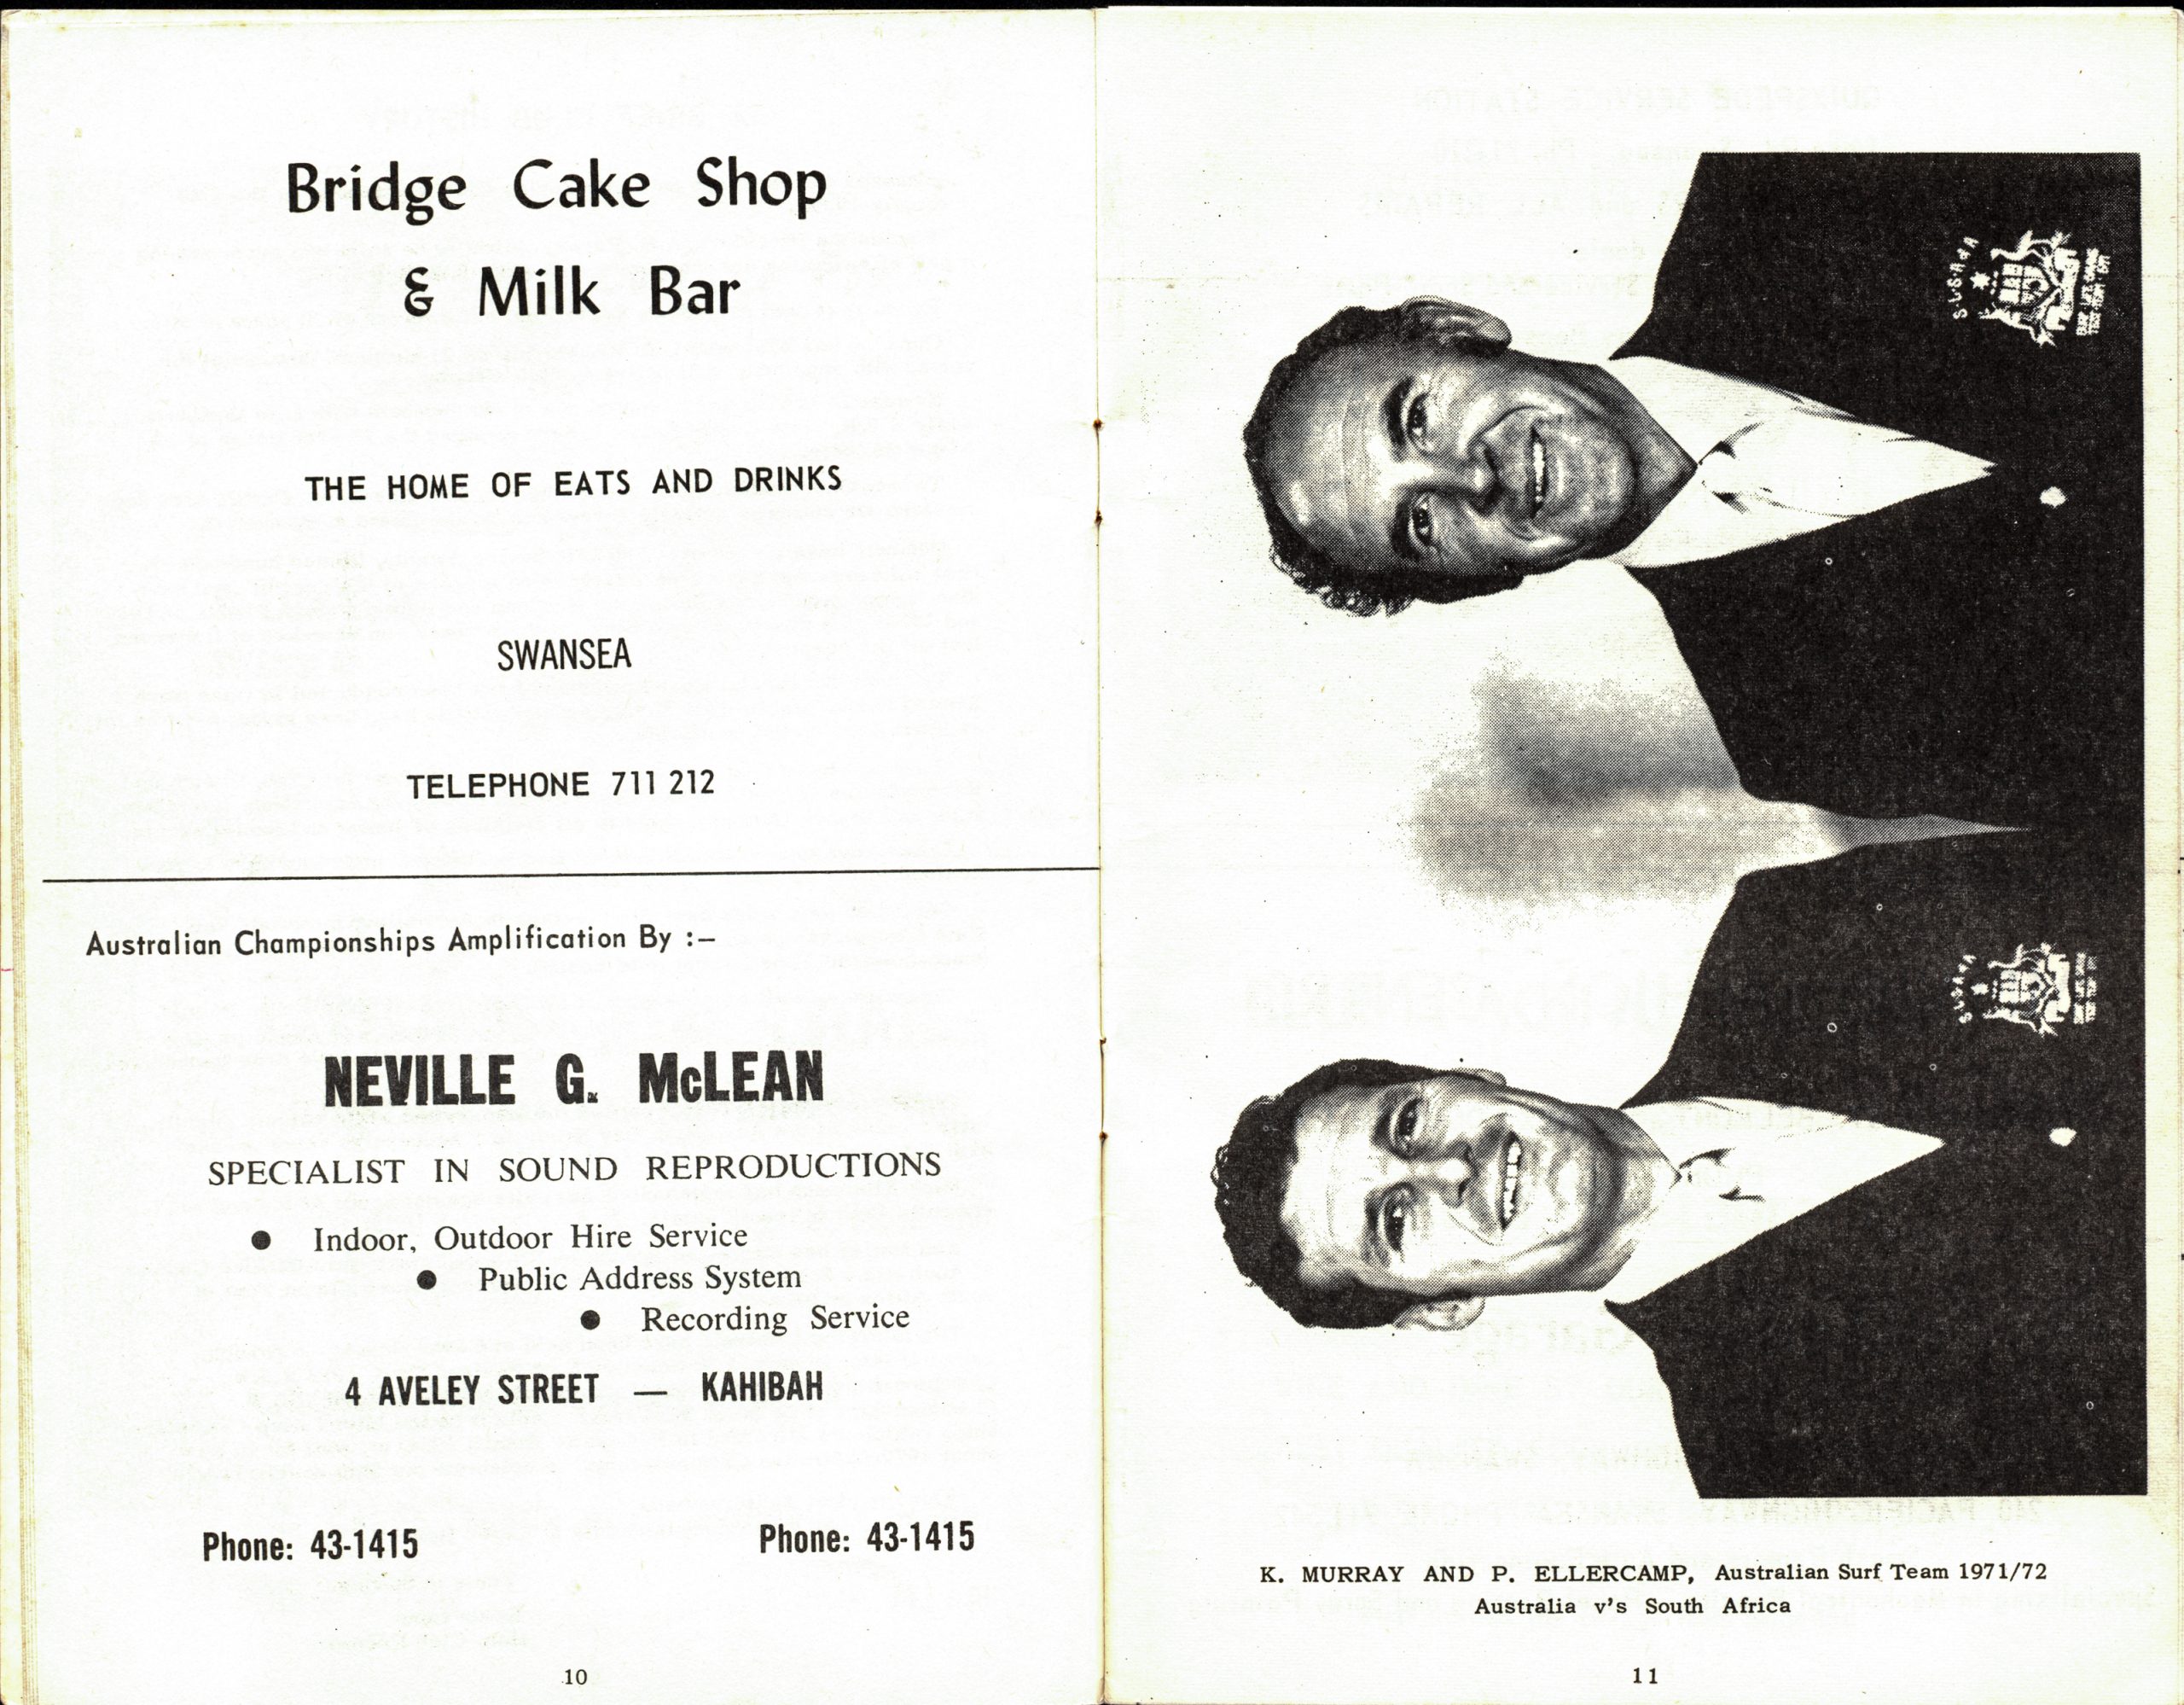 Programme pages with local advertisements followed by a black and white photograph of two men in suits with crests on the breast pocket, their names are K. Murray and P. Ellercamp.